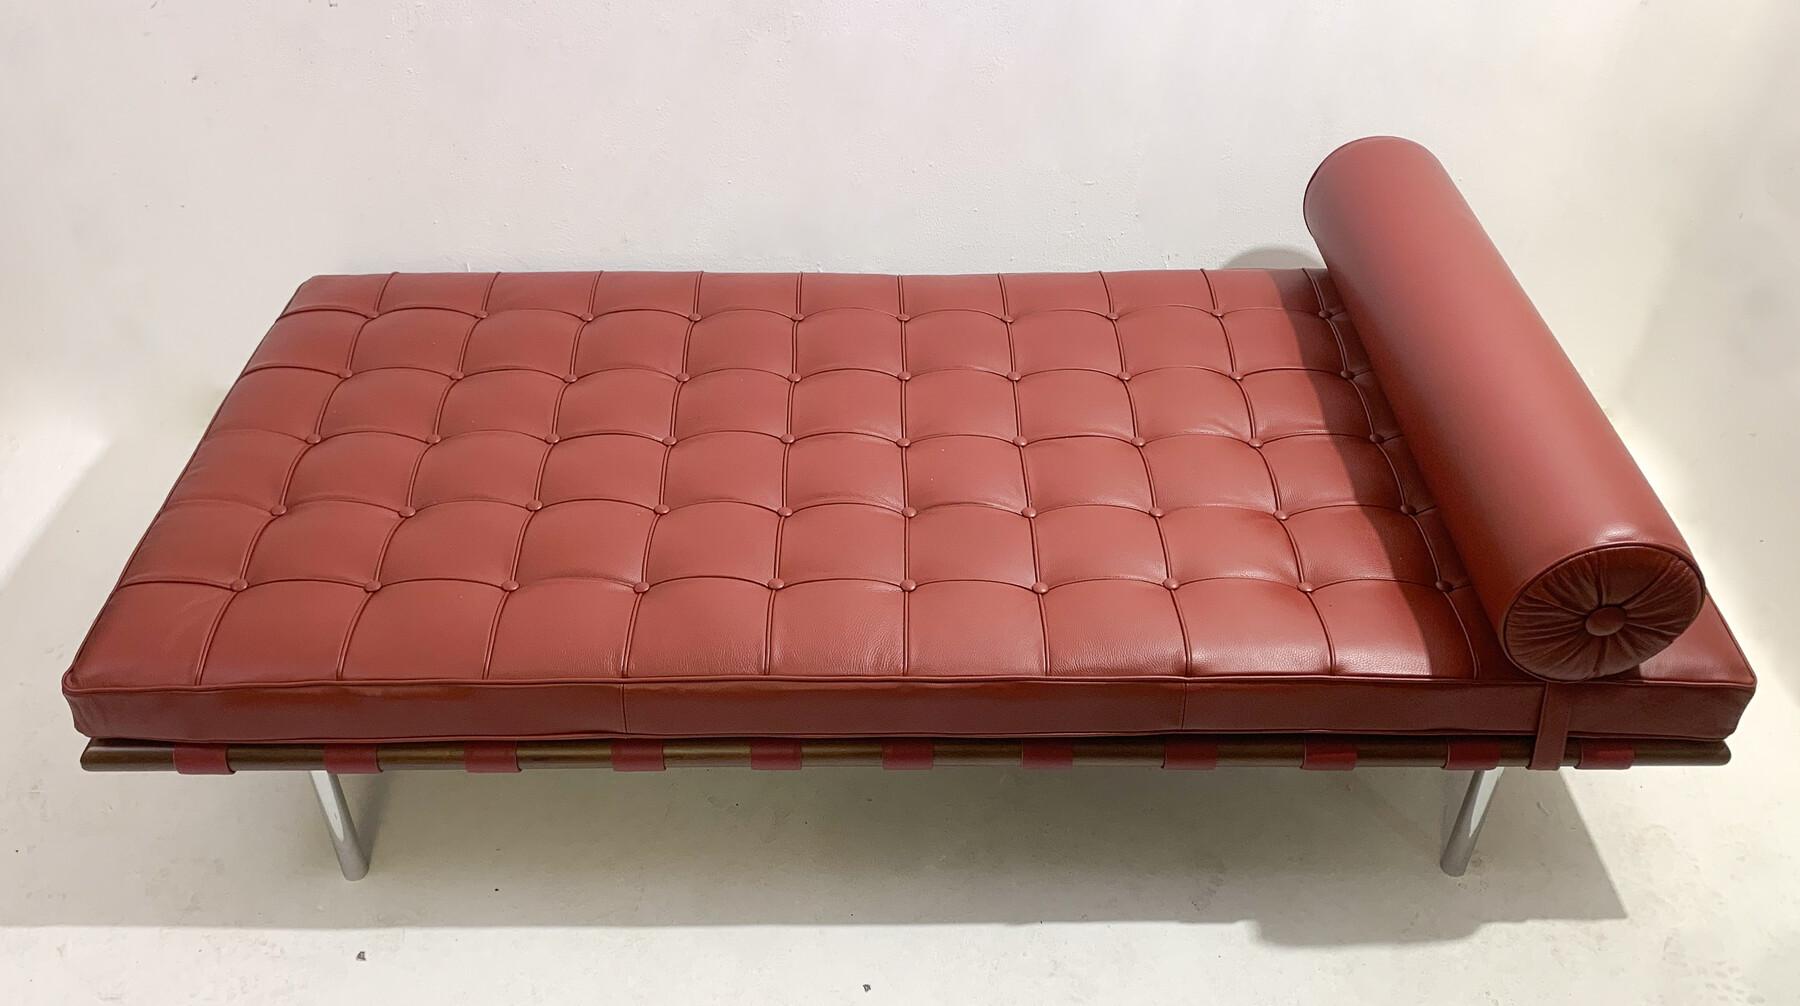 Barcelona Daybed by Ludwig Mies van der Rohe for Knoll, Burgundy Leather, 1990s For Sale 4